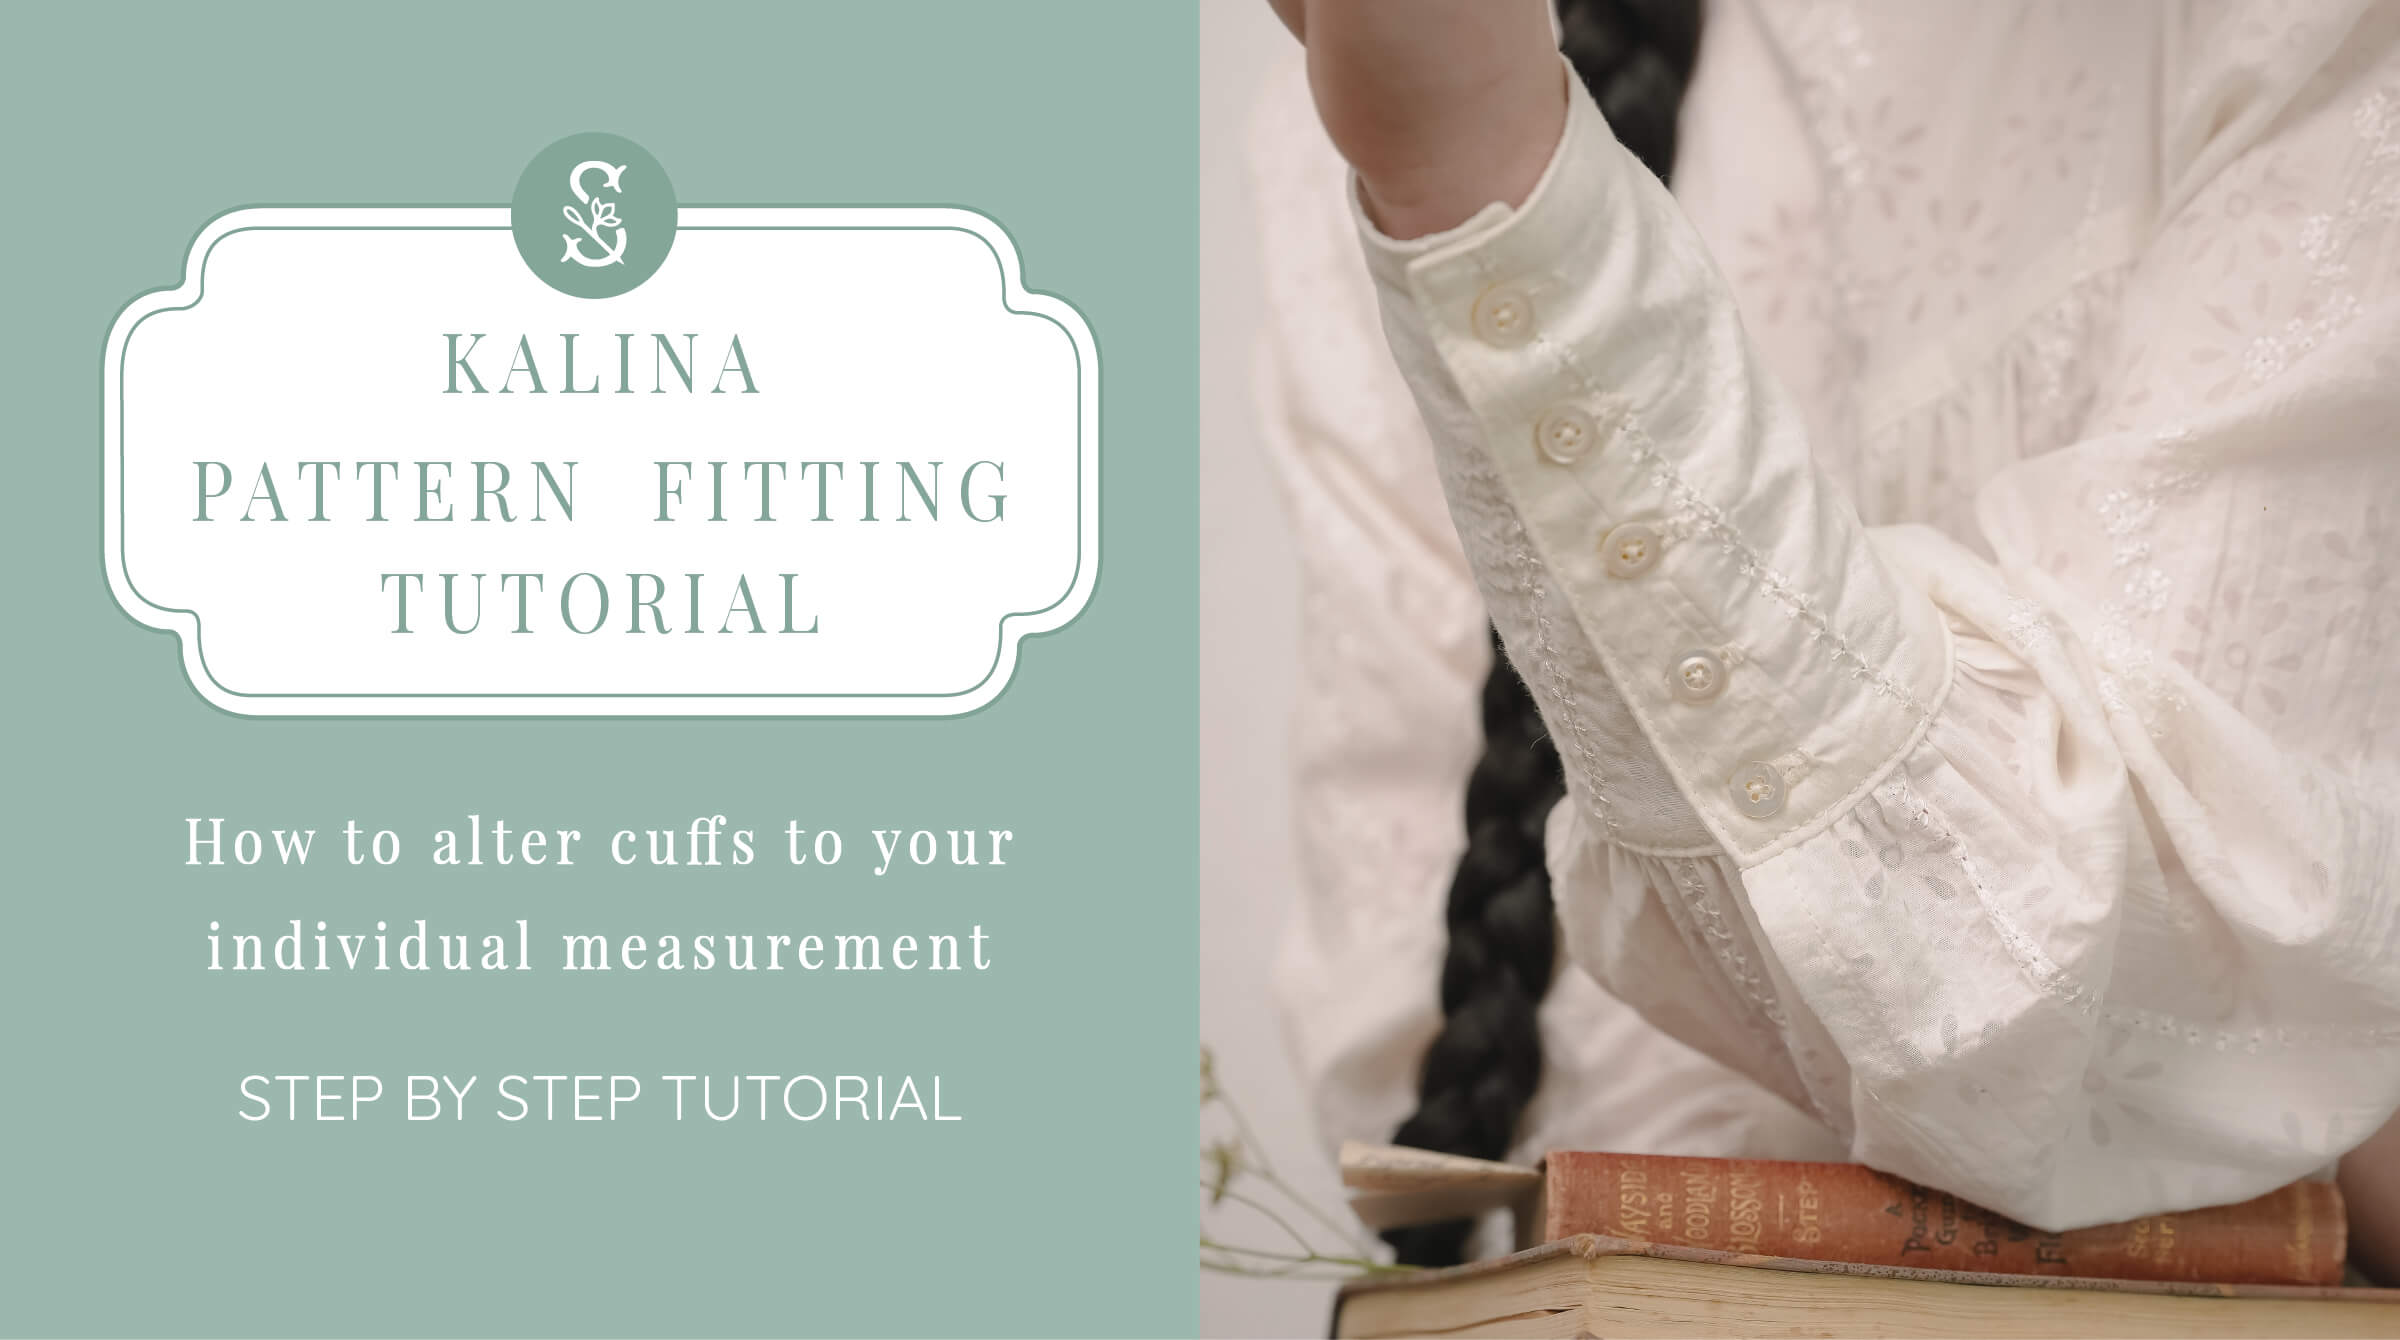 Kalina Pattern Fitting Tutorial: How to alter cuffs to your individual measurement